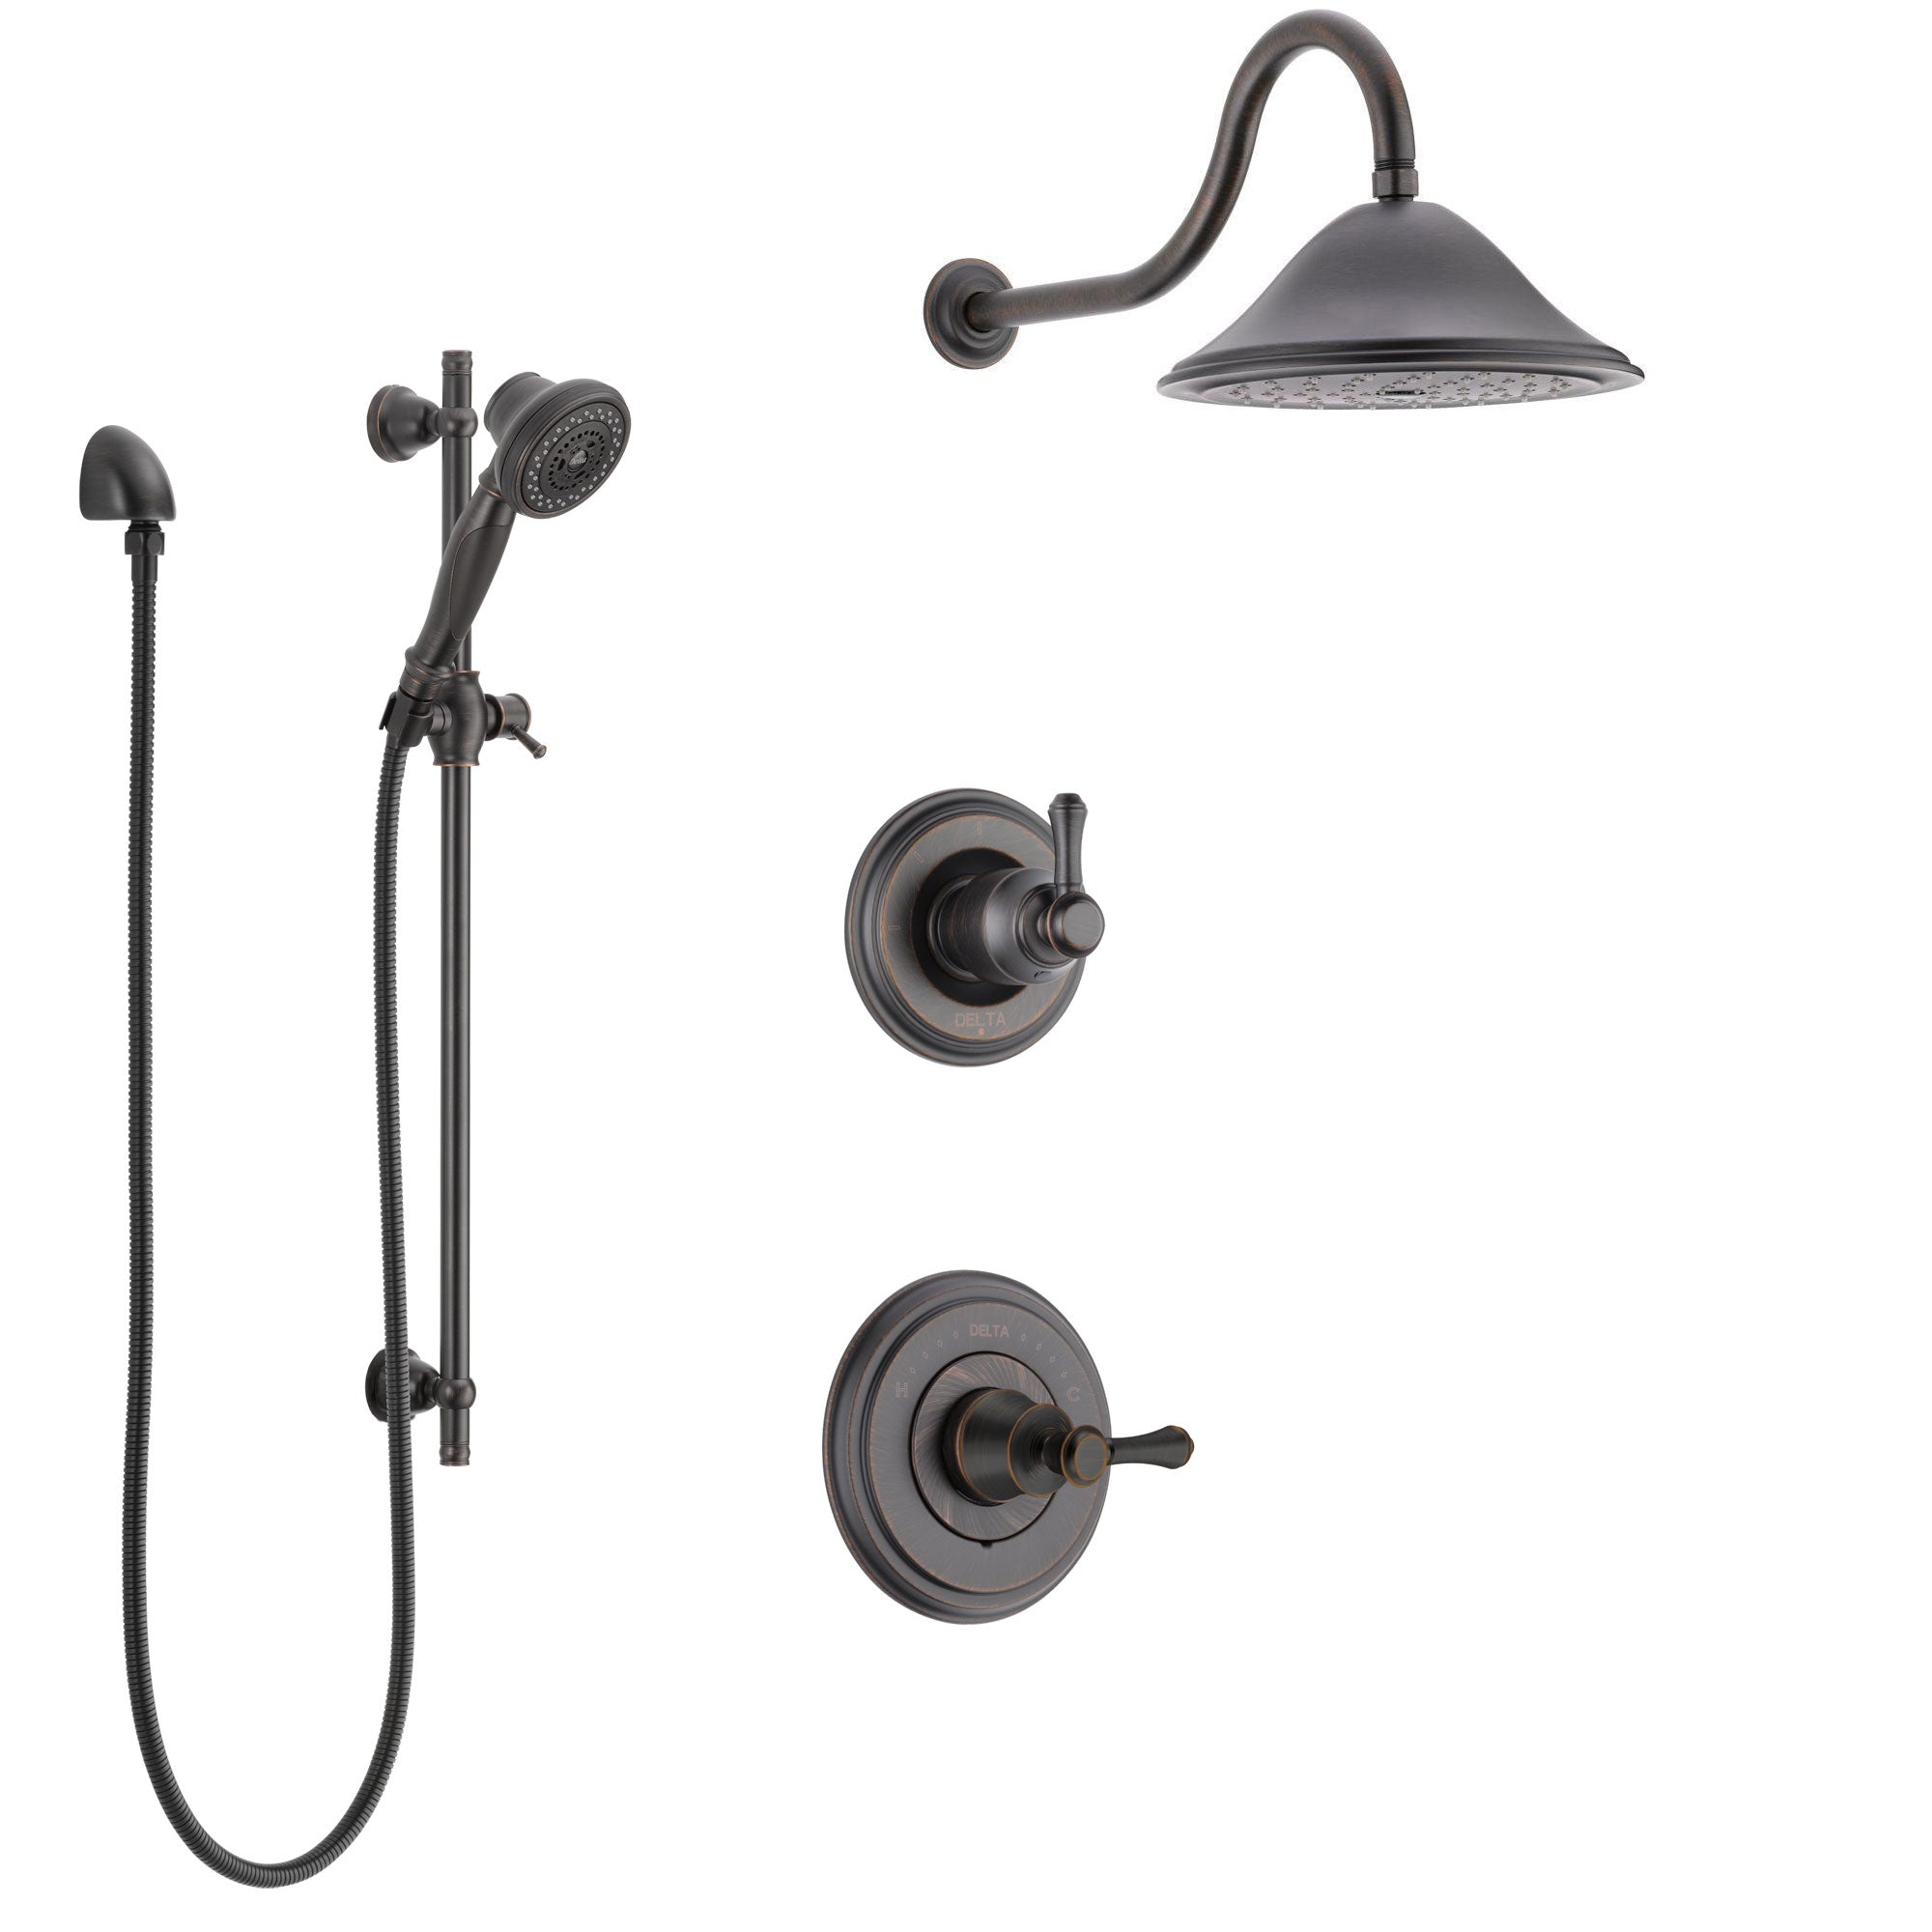 Delta Cassidy Venetian Bronze Finish Shower System with Control Handle, 3-Setting Diverter, Showerhead, and Hand Shower with Slidebar SS14973RB6